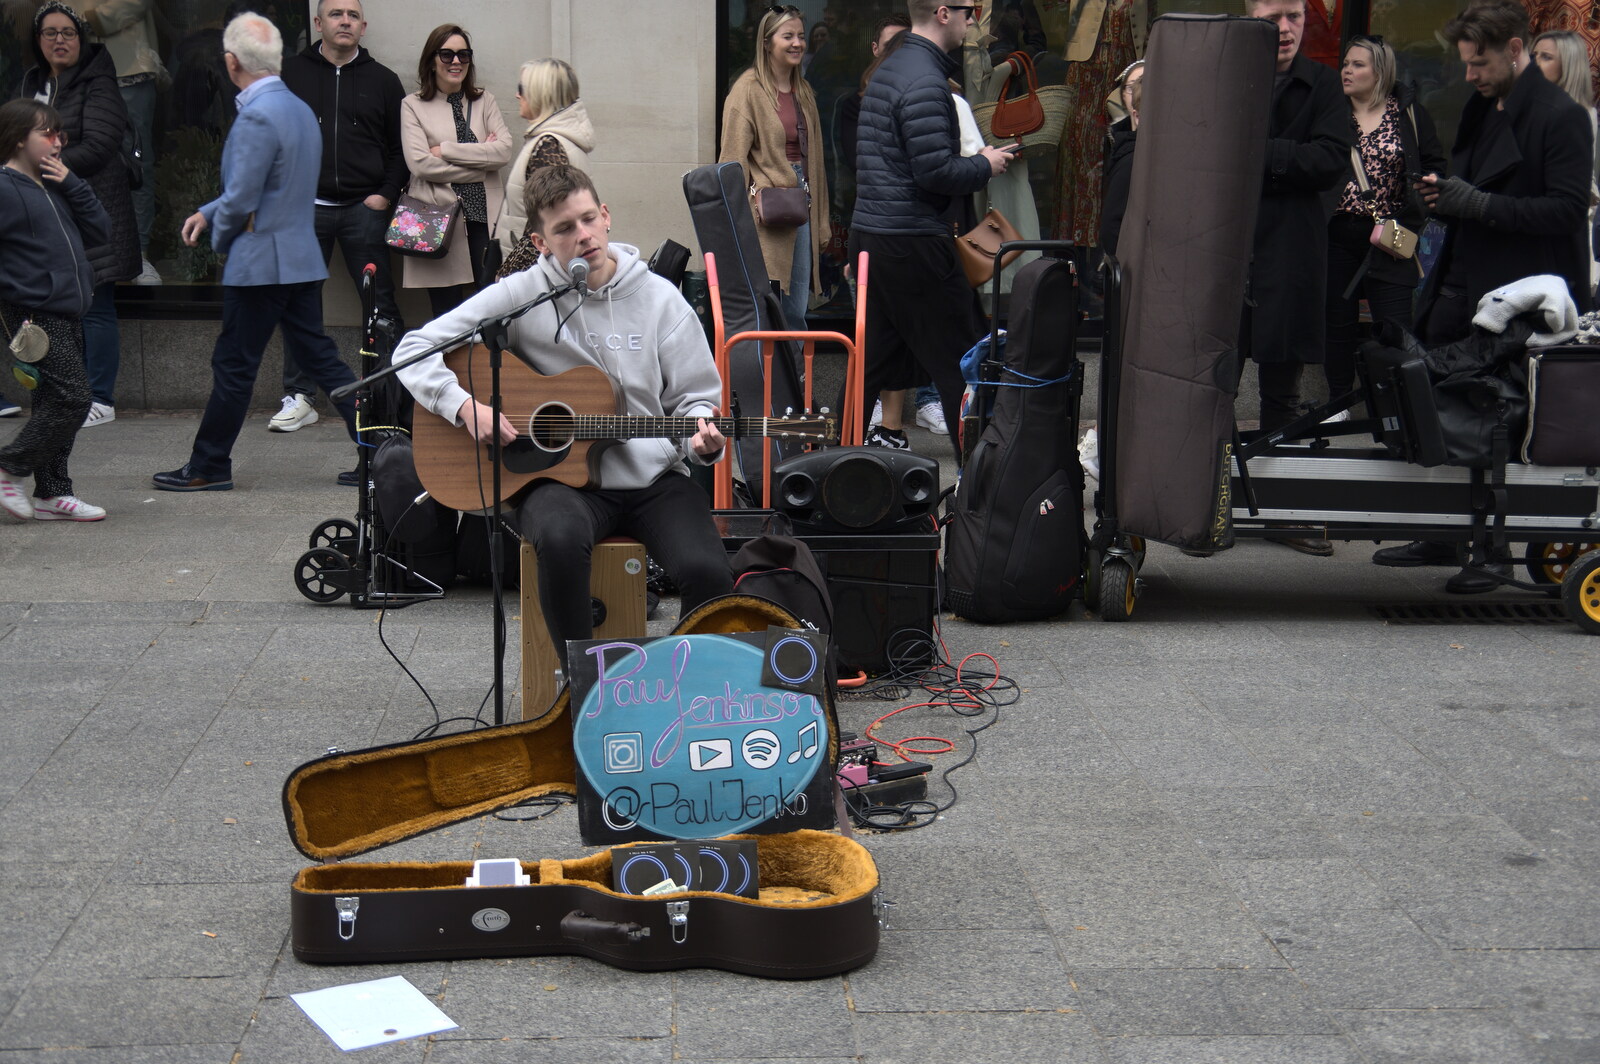 Blackrock North and South, Louth and County Dublin, Ireland - 23rd April 2022: Paul Jenkins - busking on Grafton Street